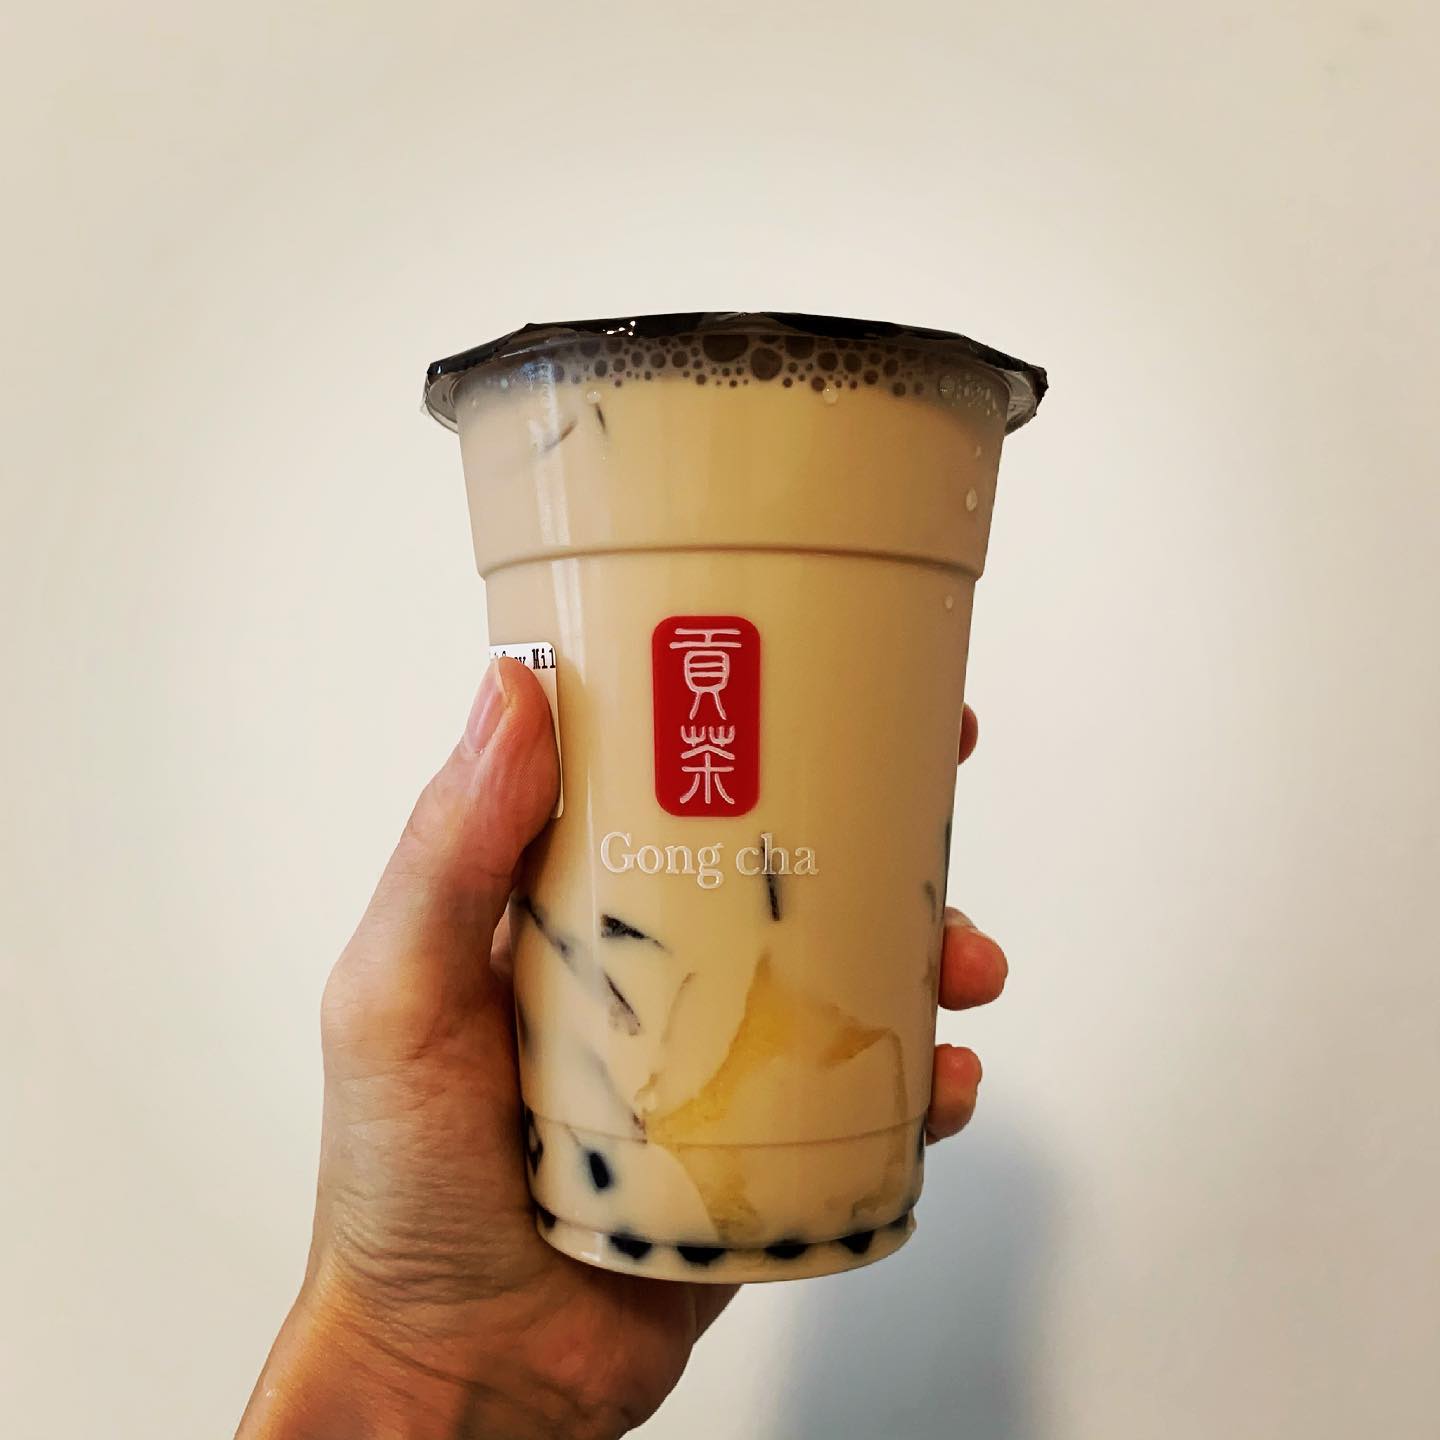 【1for1情報】Gong cha﻿ 